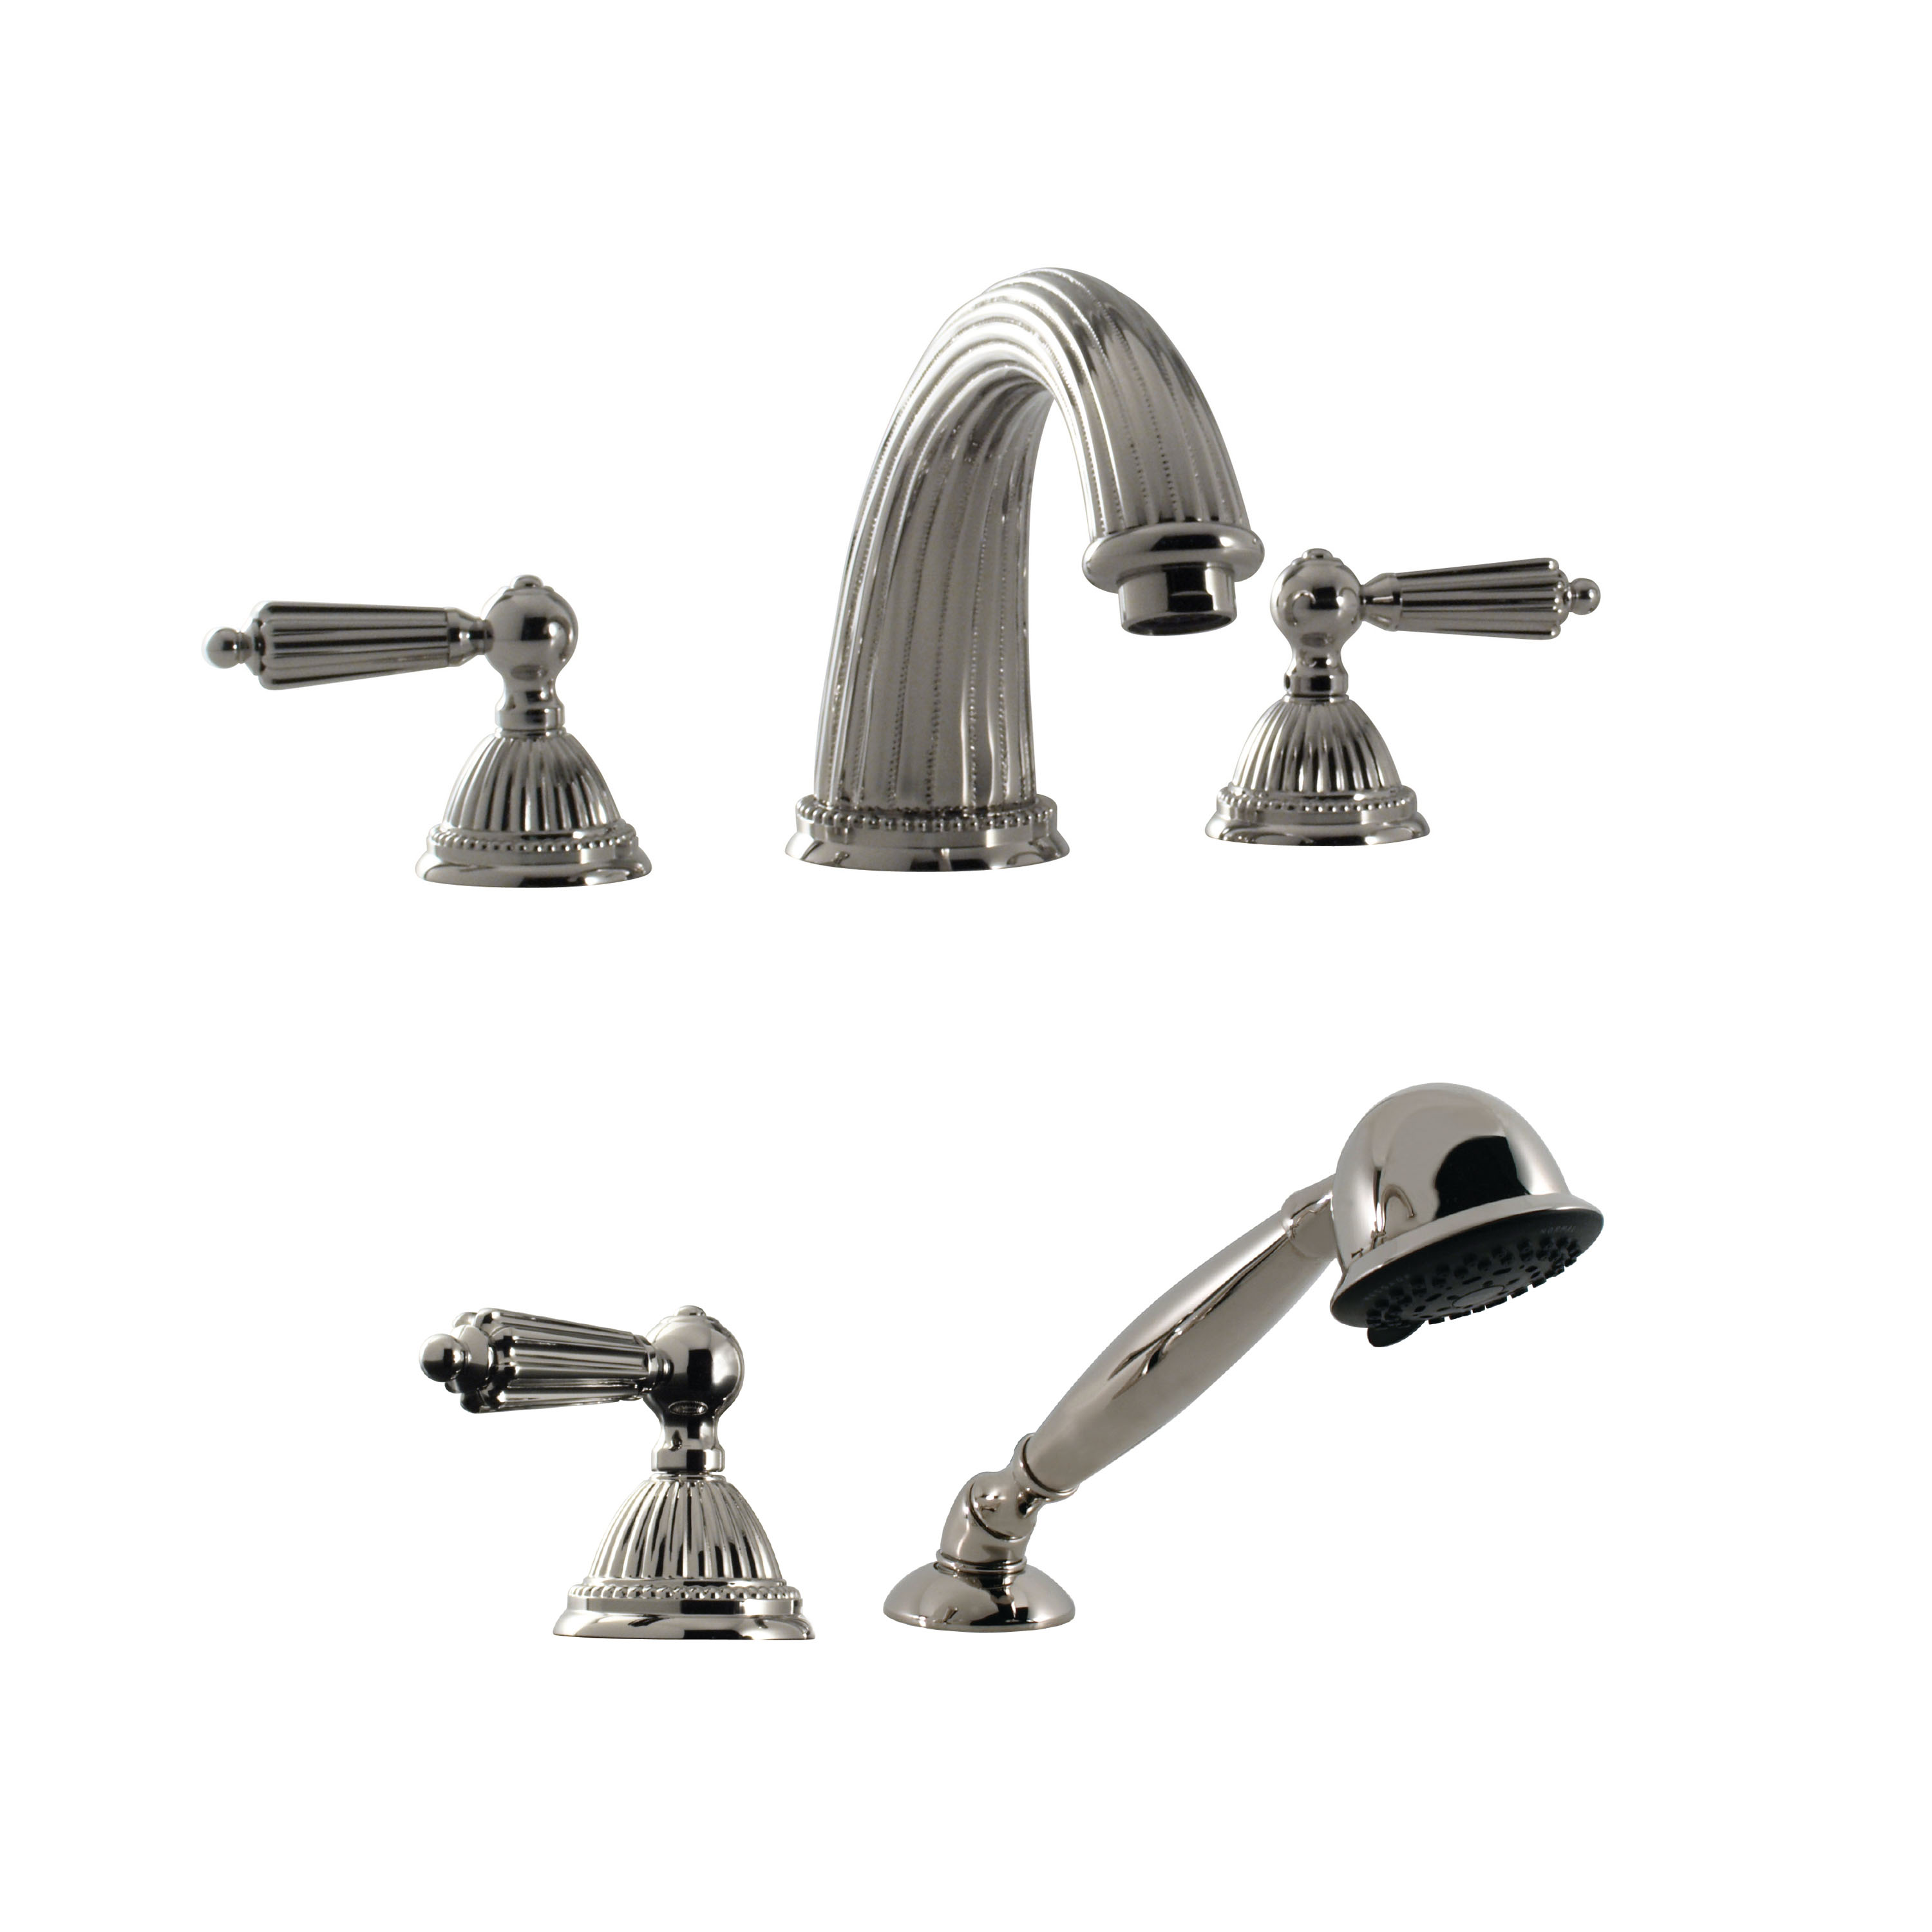 Santec 1155LL10-TM Monarch Roman Tub Filler Set with Hand Held Shower with "LL" Handles - Polished Chrome - Click Image to Close